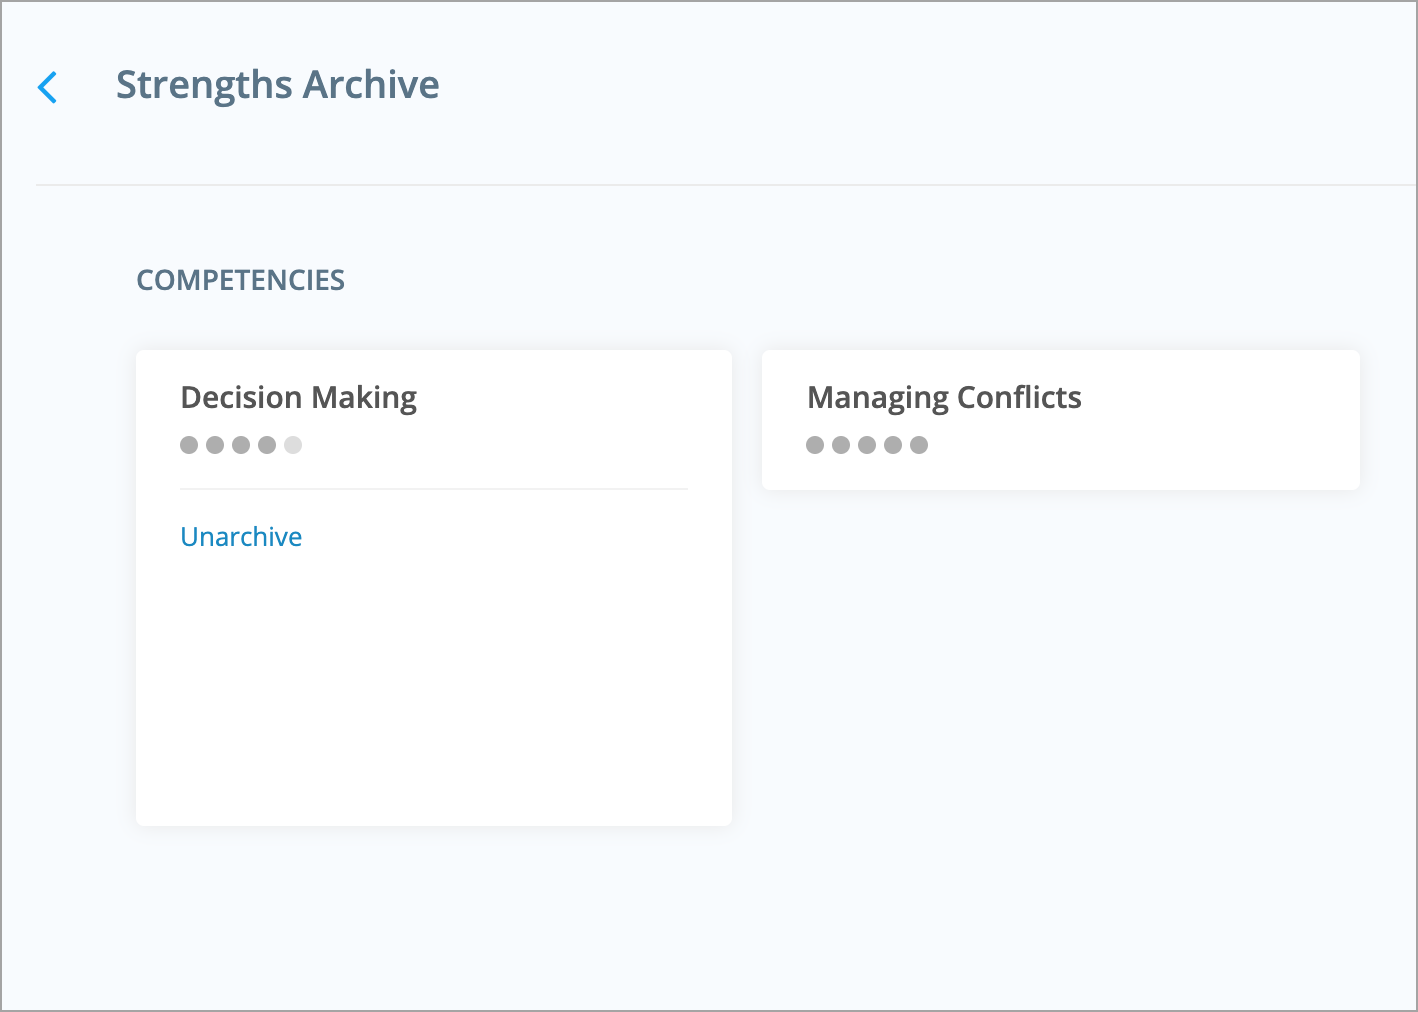 Viewing the strengths archive